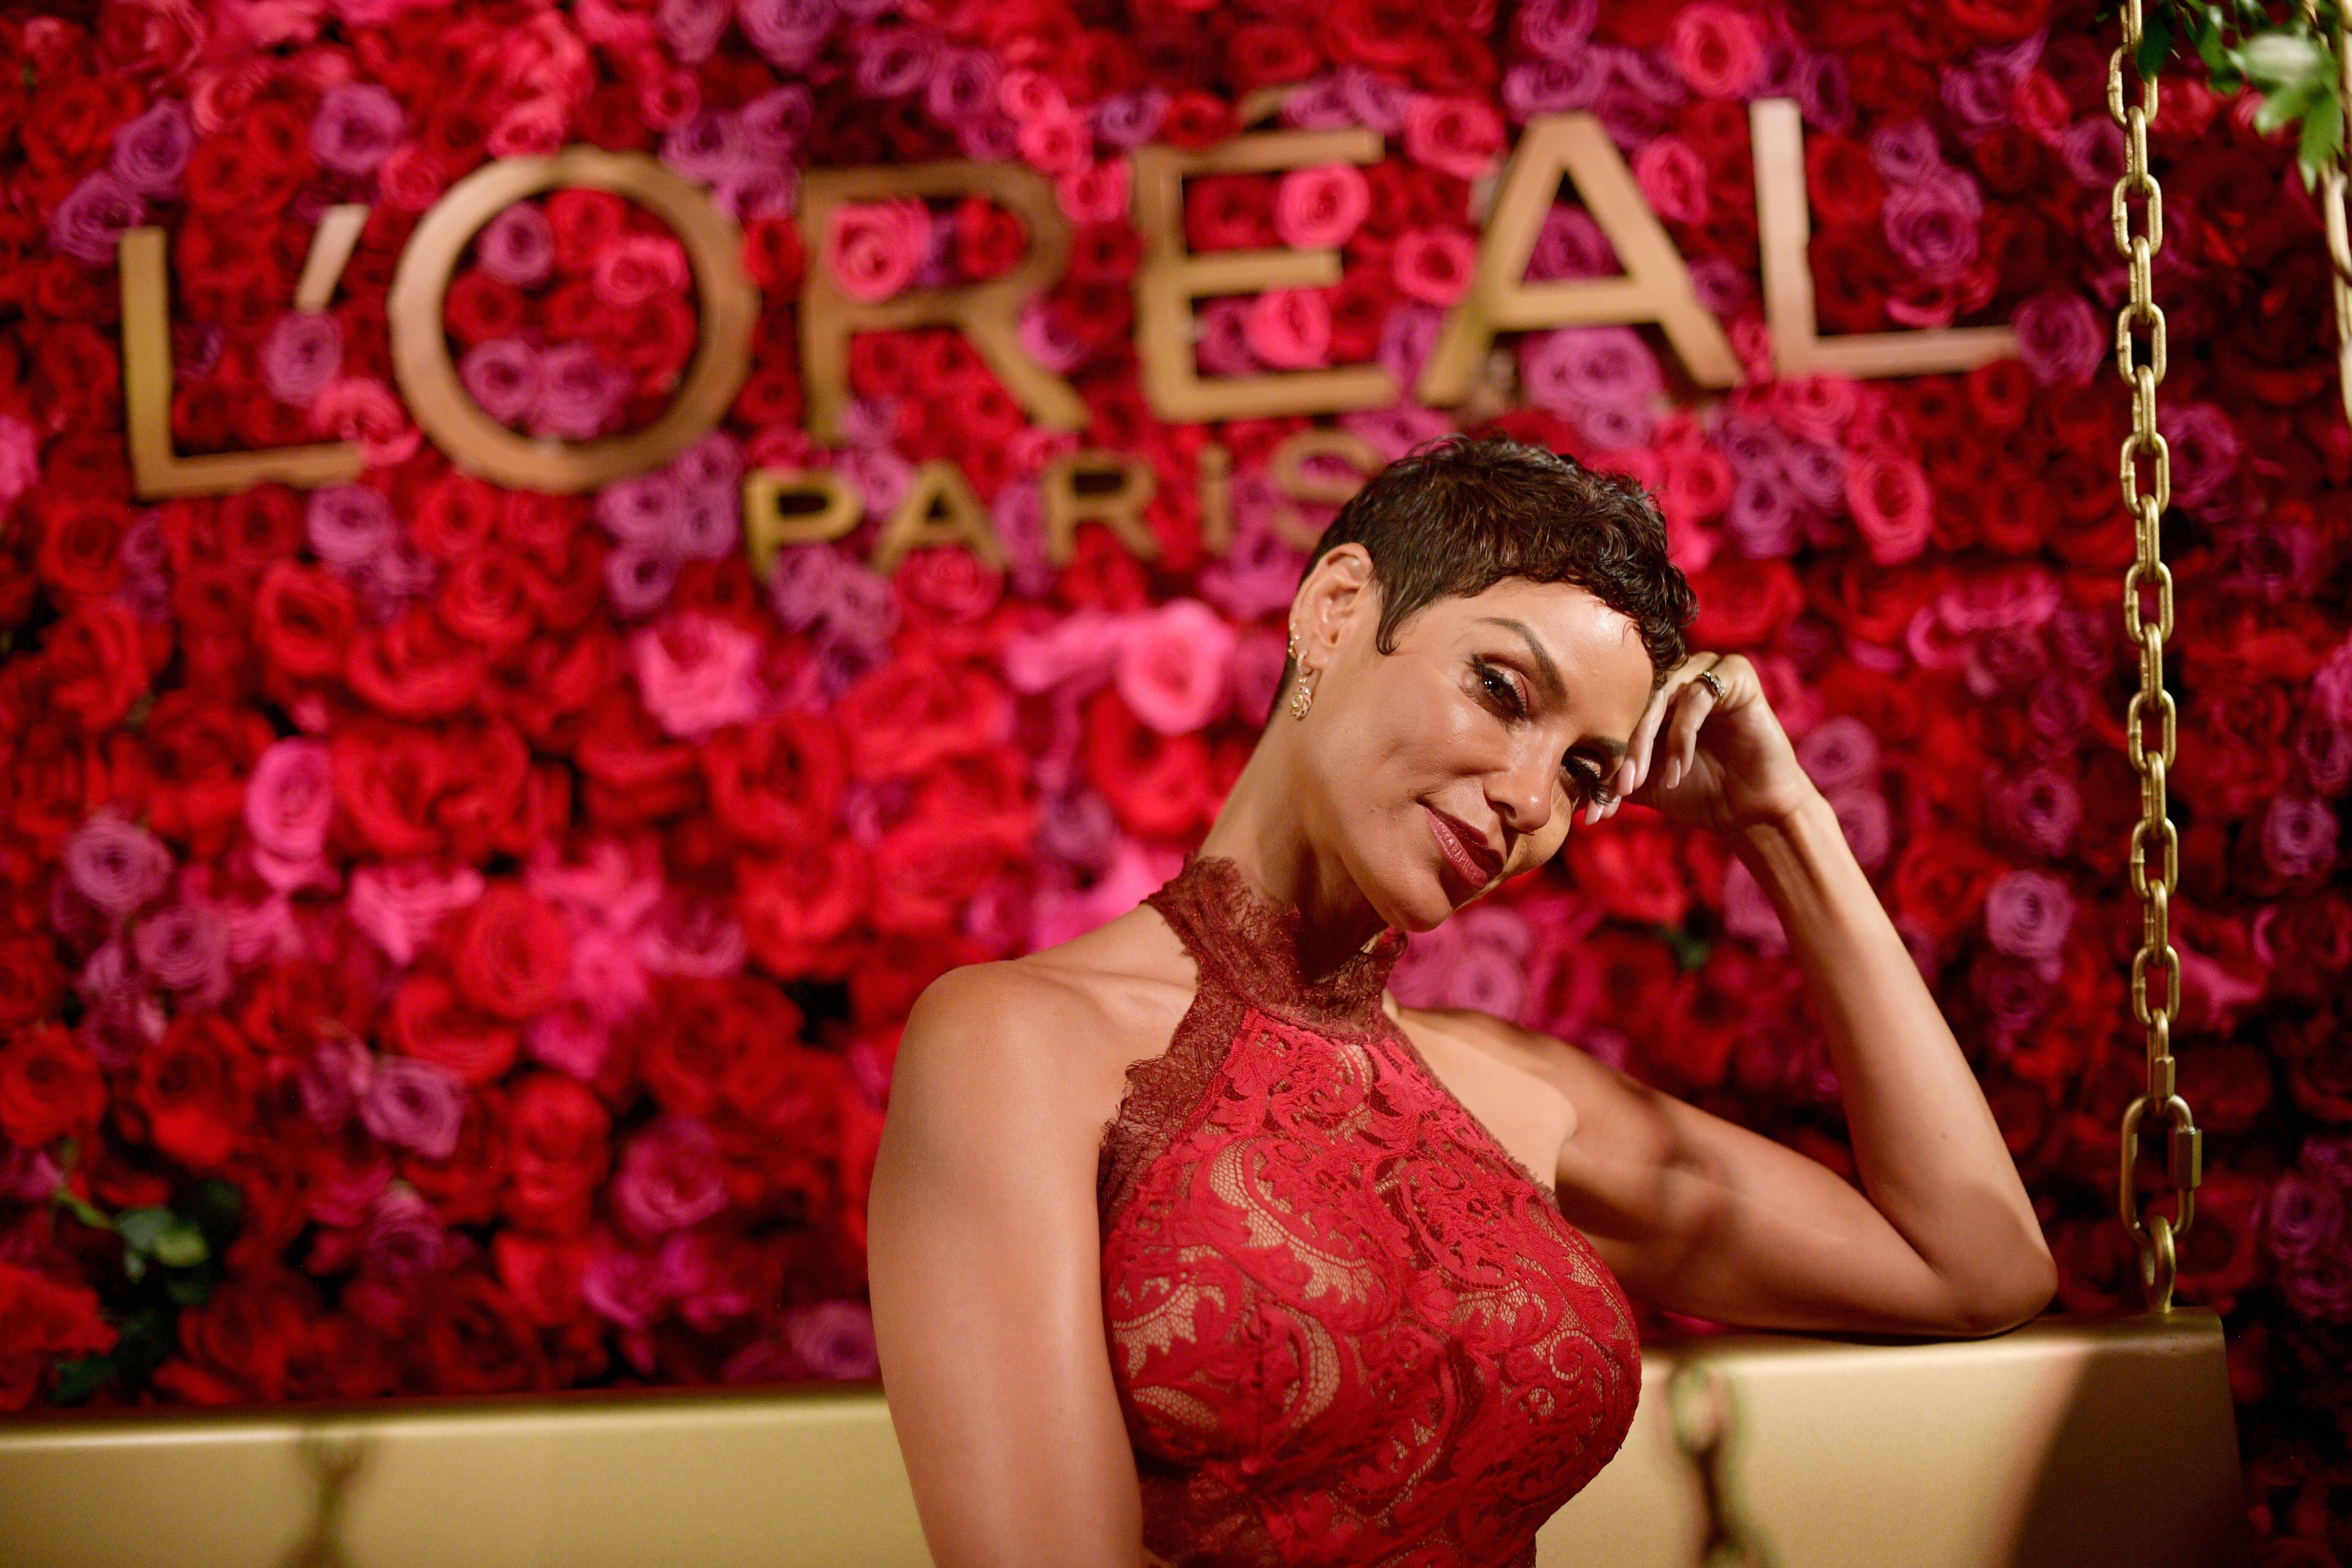 Nicole Mitchell Murphy attends the 2018 Pre-Emmy Party hosted by Entertainment Weekly and L'Oreal Paris at Sunset Tower on September 15, 2018 in Los Angeles, California. | Source: Getty Images